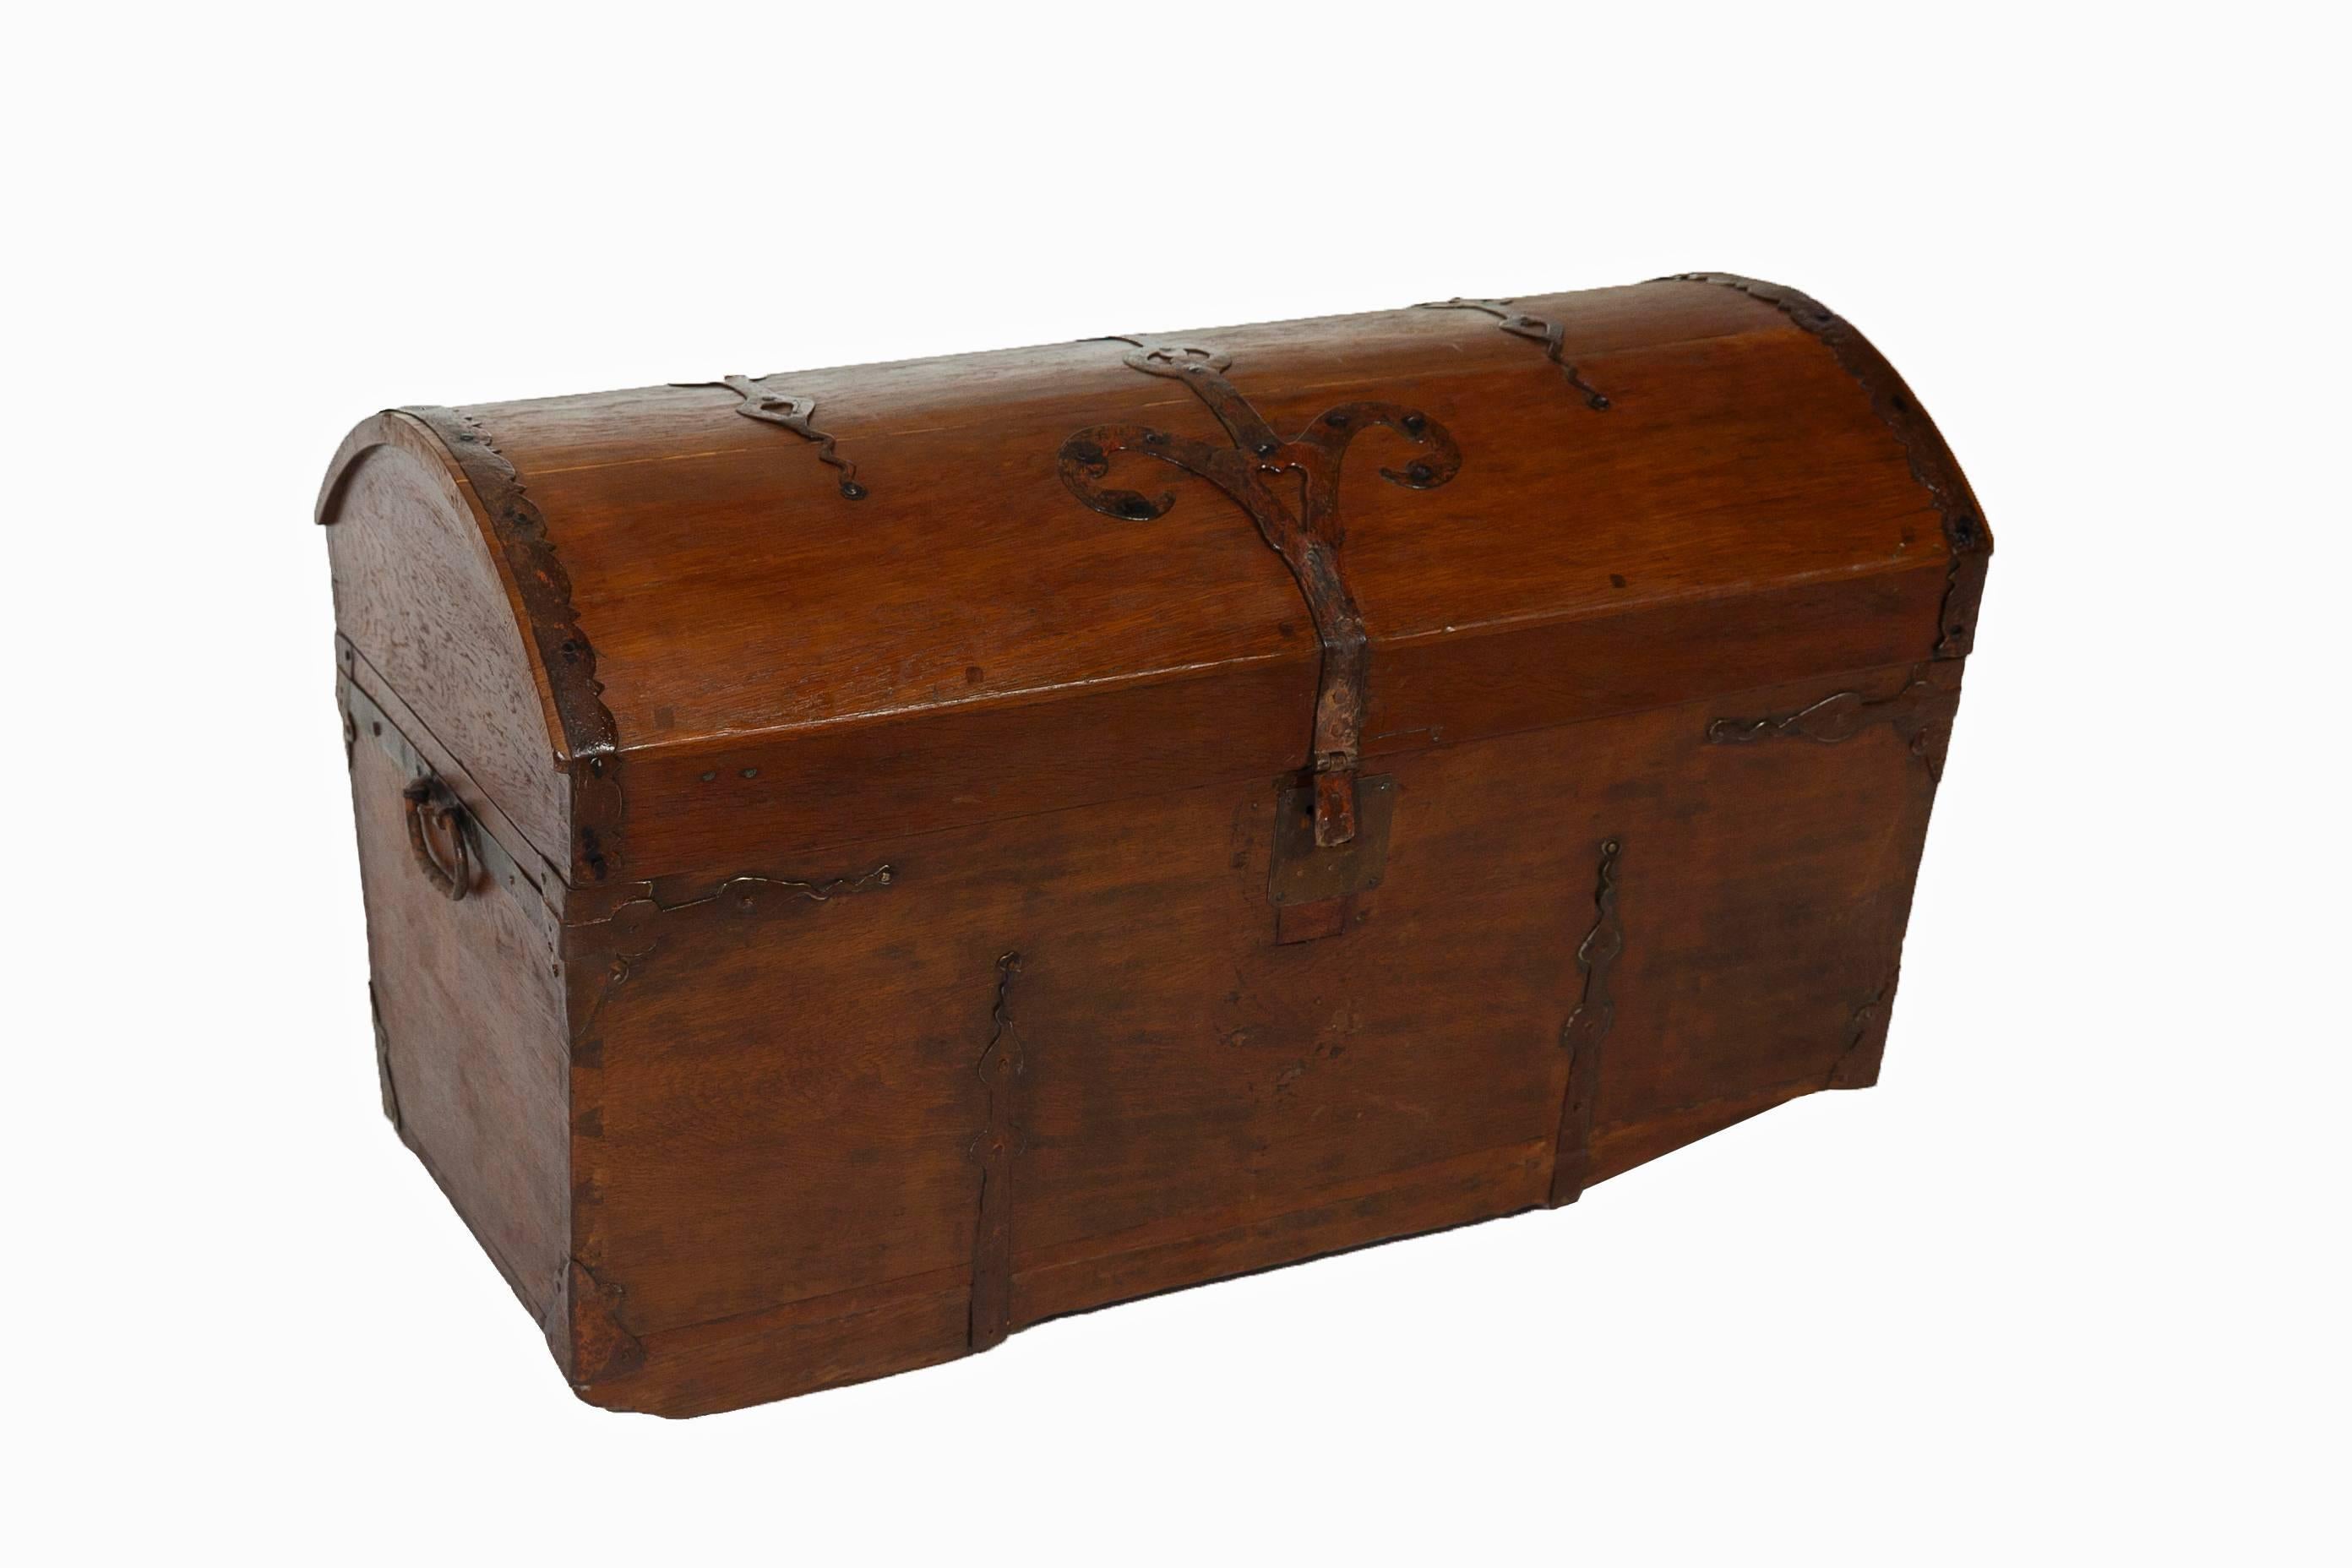 The chest has a slightly conical form and a slightly domed lid; the lid and body are fitted with iron bands. In addition, there is a small compartment inside which is closed by a lid and which, at the time, was used to keep coins, letters and